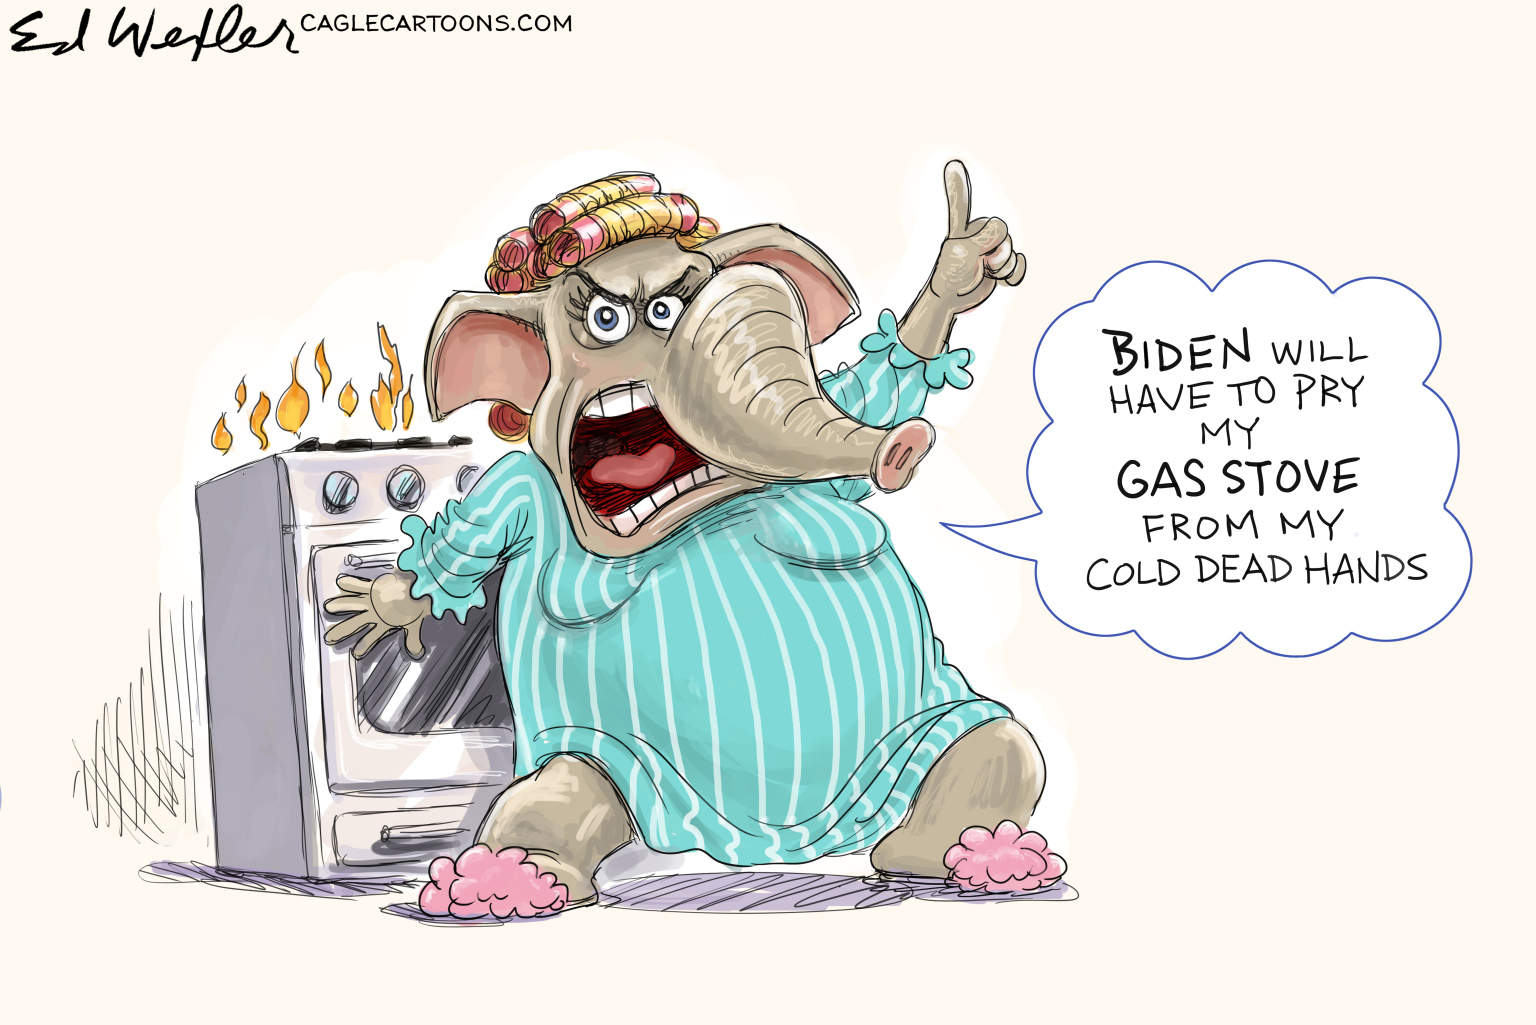 Gas Stove From My Cold Dead Hands - By Ed Wexler